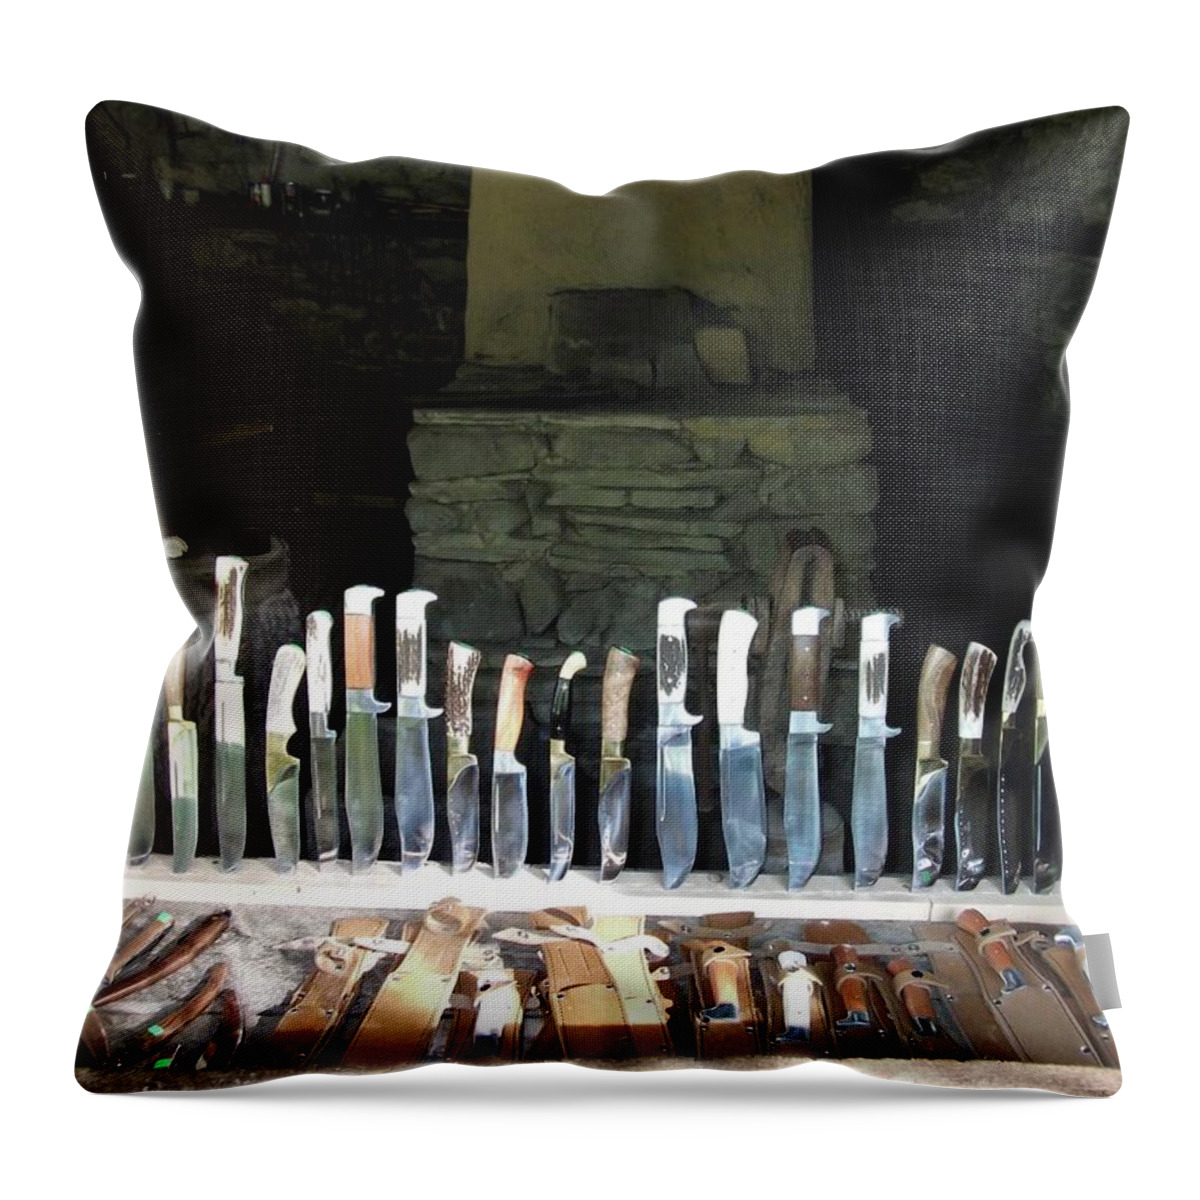 Knife Shop Throw Pillow featuring the photograph Knife shop in Bulgaria by Martin Smith